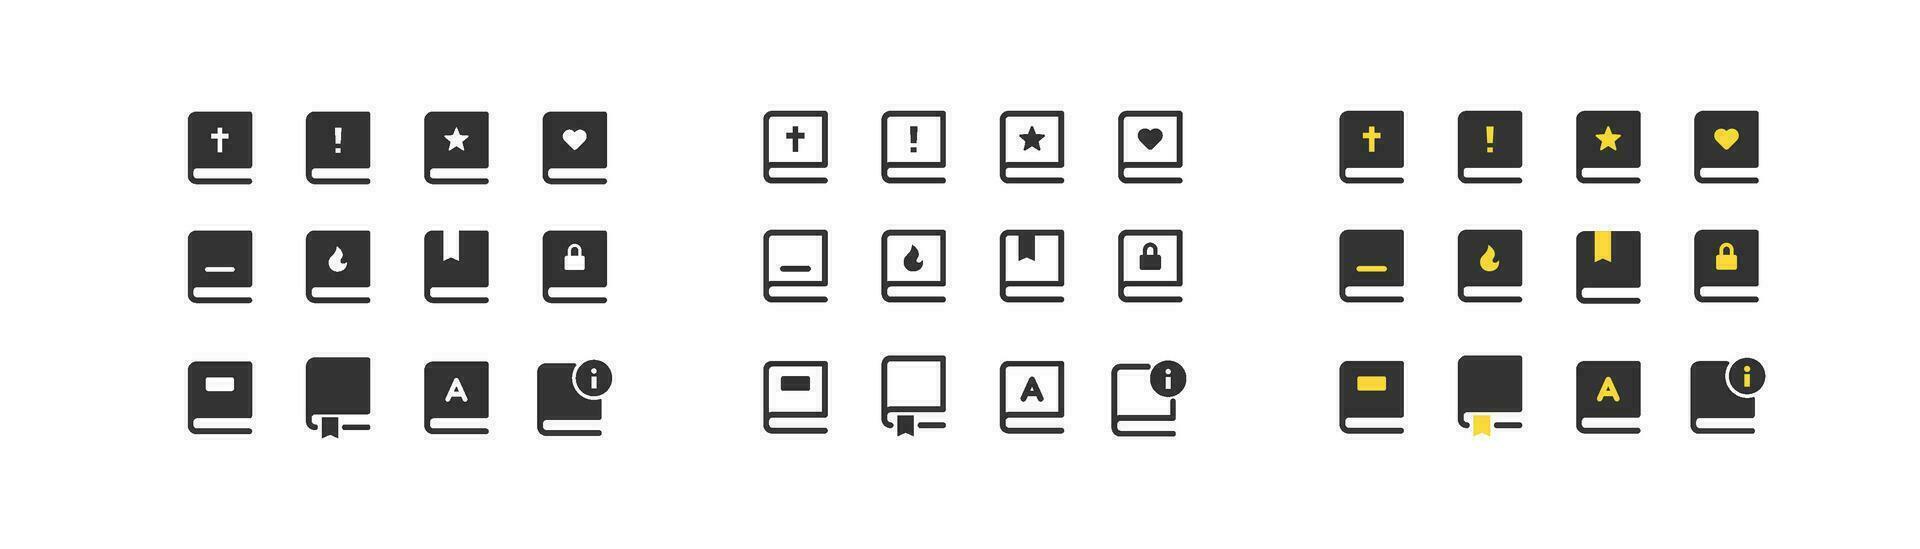 Book and user interface icons set, outline flat and colored vector illustration